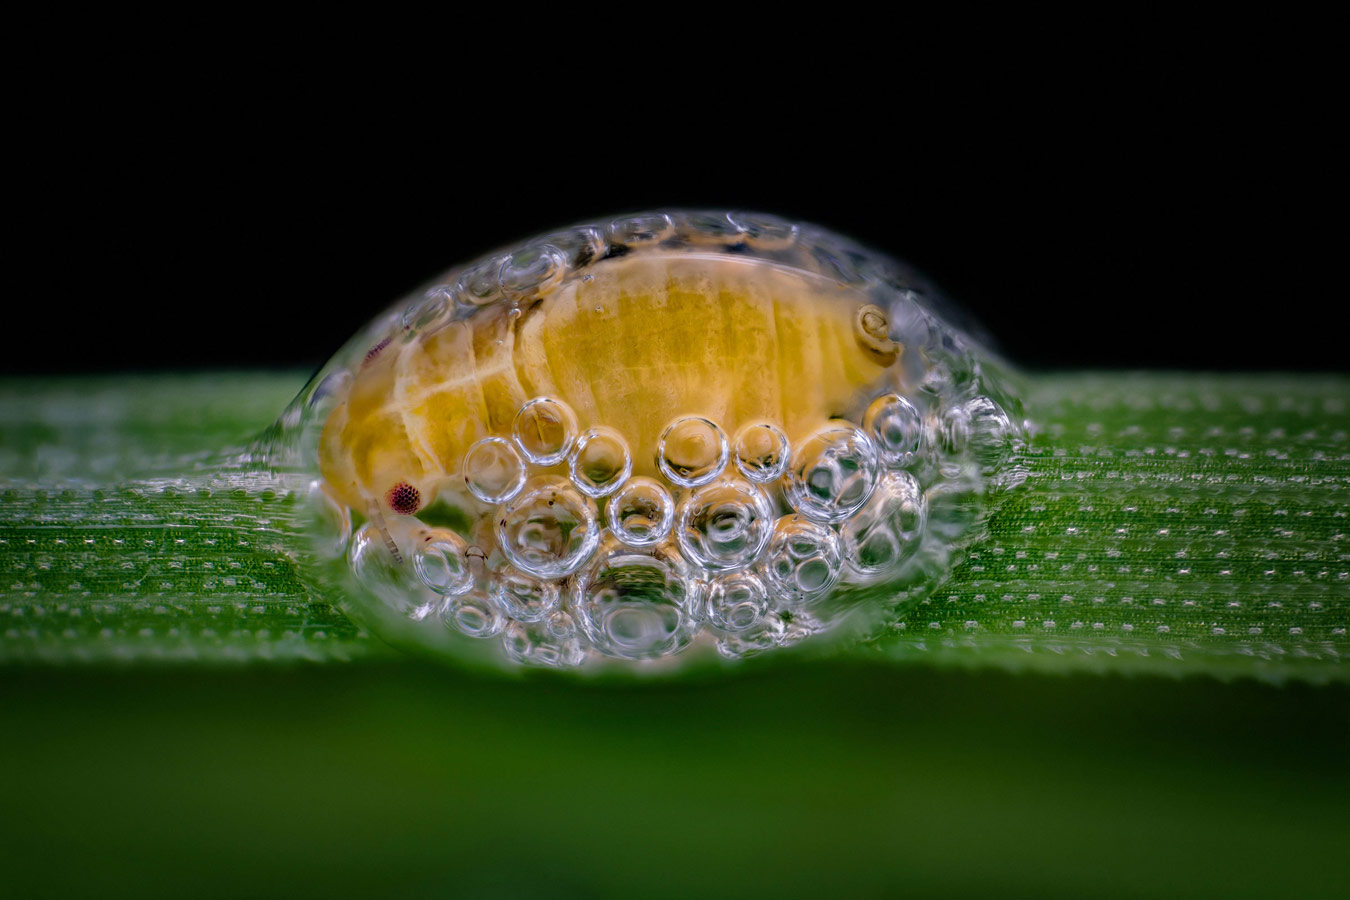 Spittlebug nymph in its bubble house, © Saulius Gugis, Naperville, Illinois, USA, 3rd Place, Nikon’s Small World - Photomicrography Competition